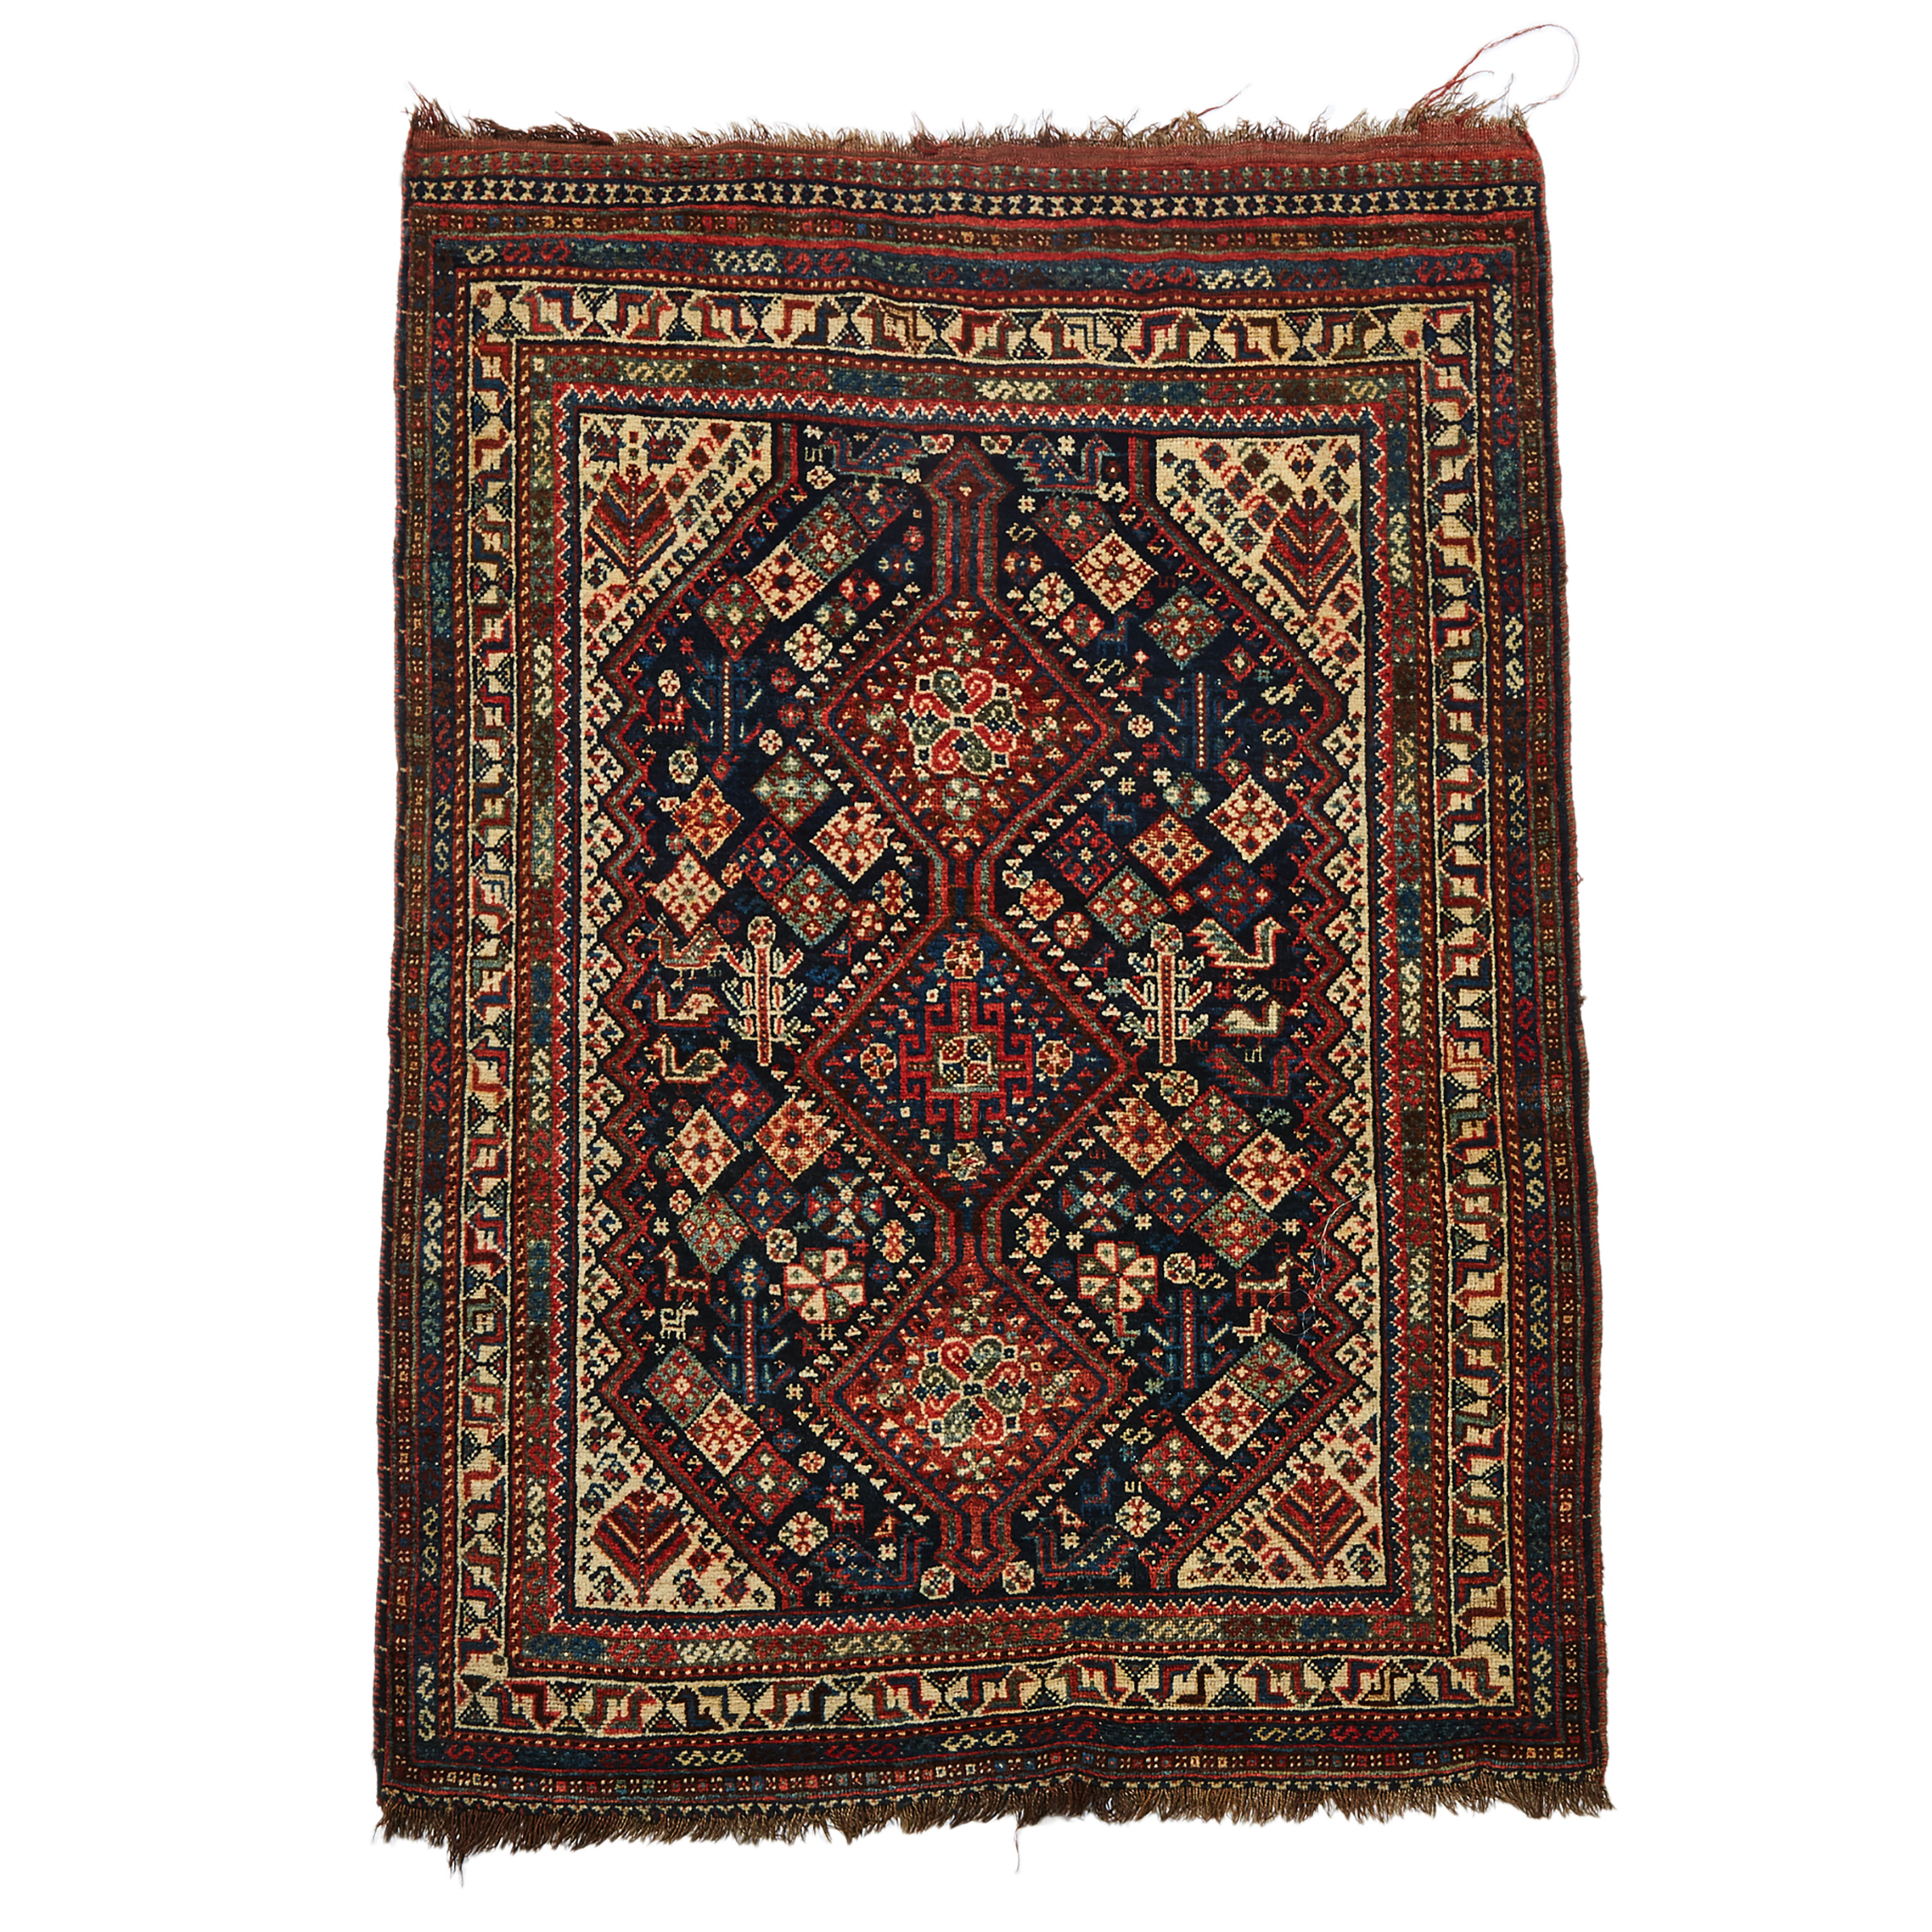 Qashqai Rug, Persian, early to mid 20th century